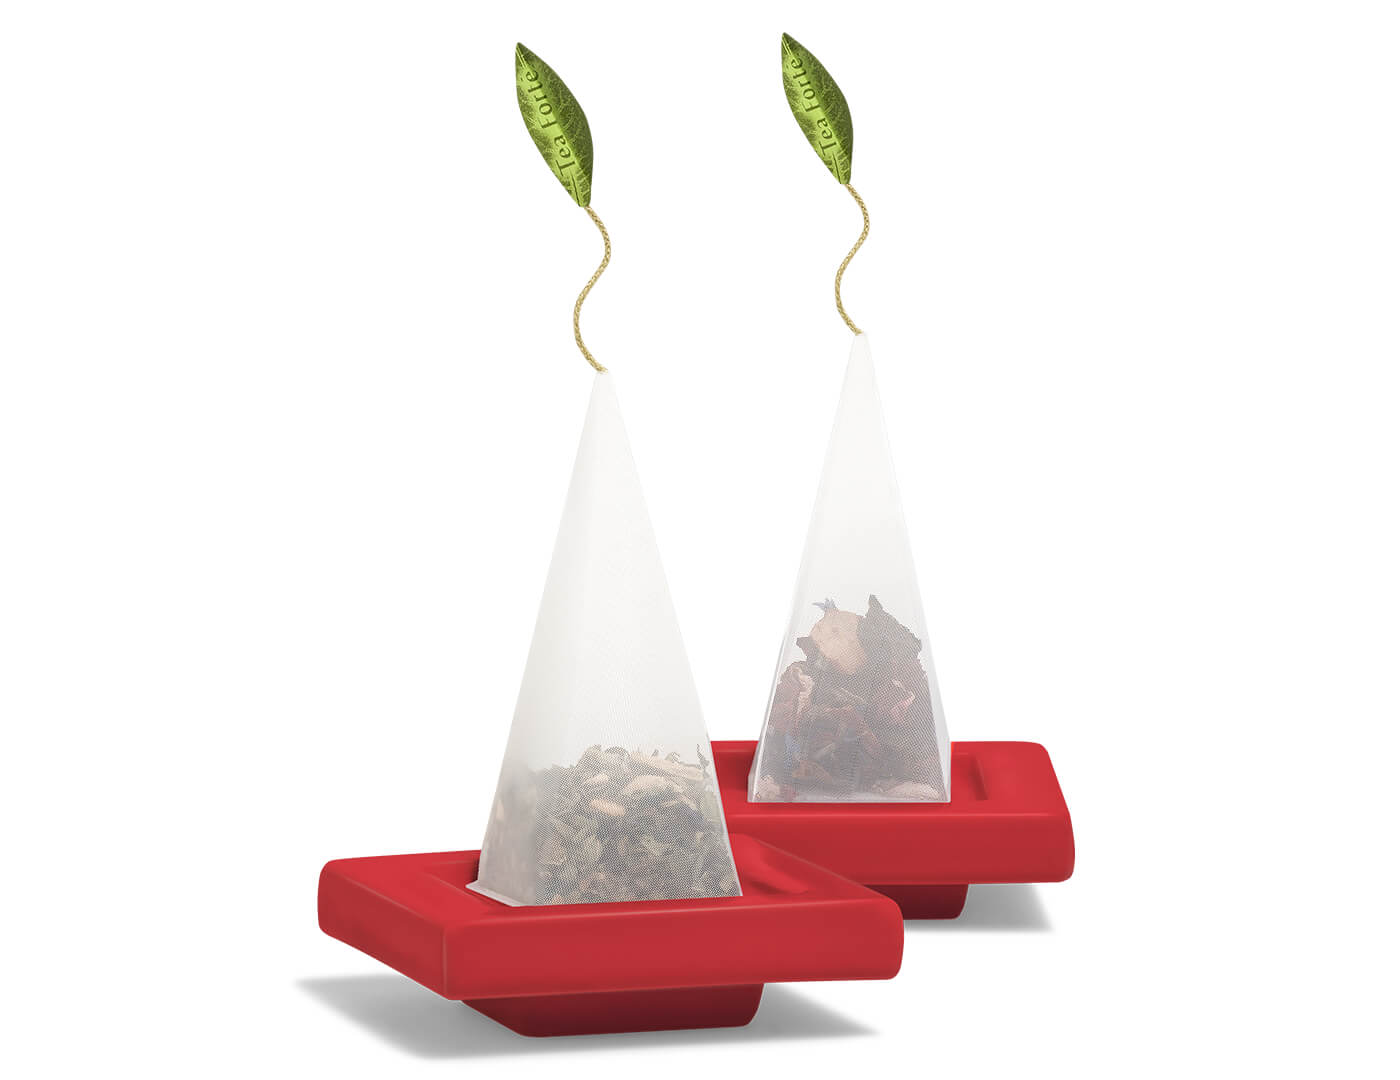 Ruby Red Tea Tray, set of two with pyramid infusers perched on top with the wrapper removed